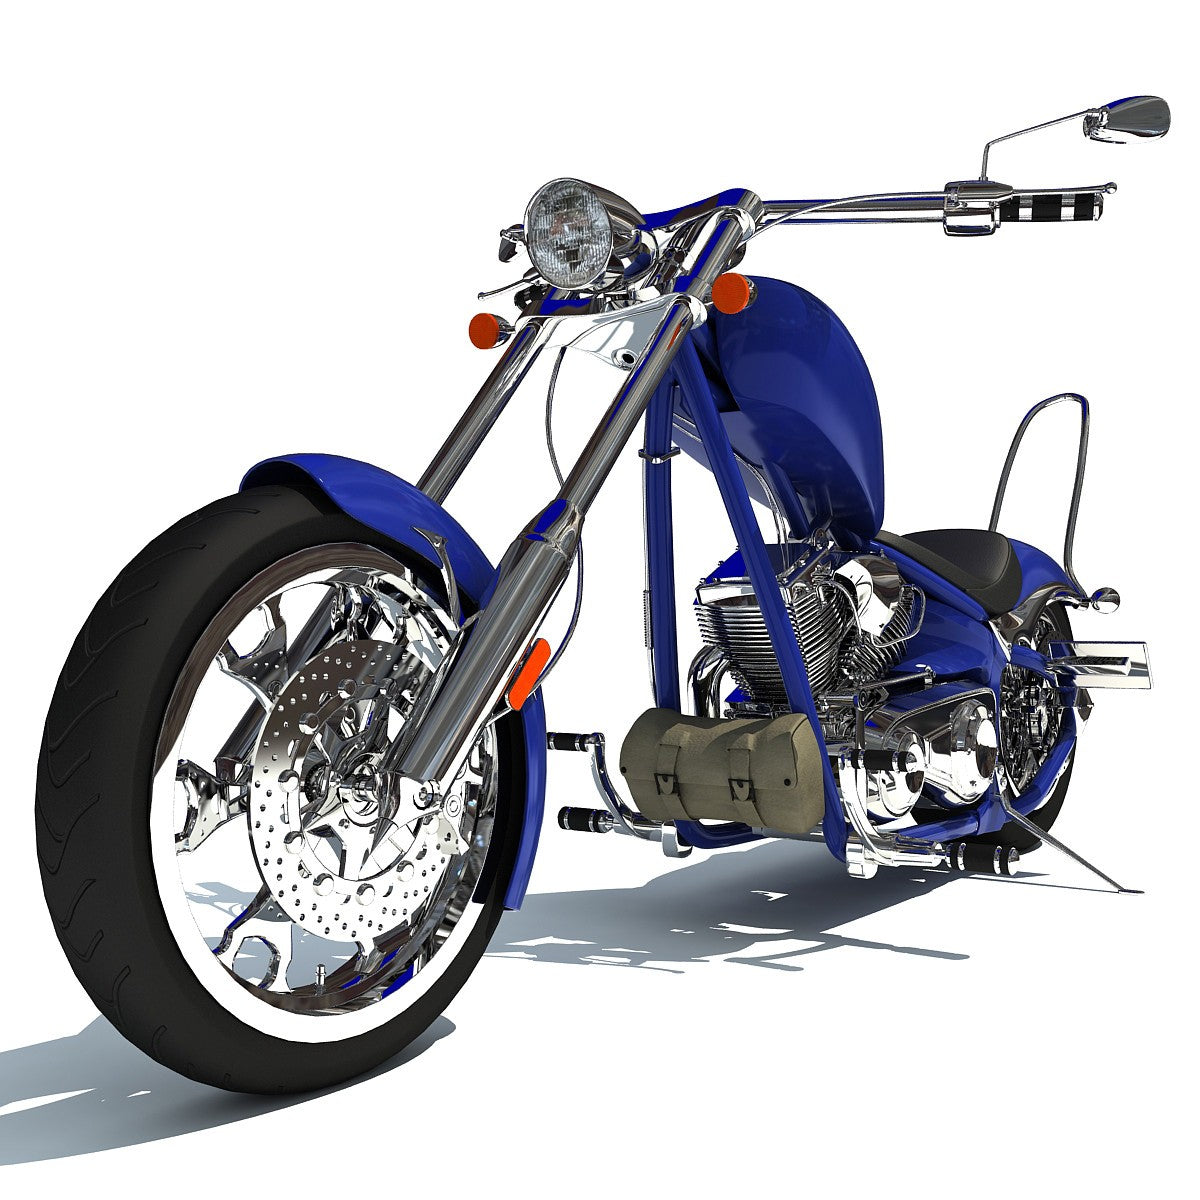 3D Motorcycles and Bikes Models